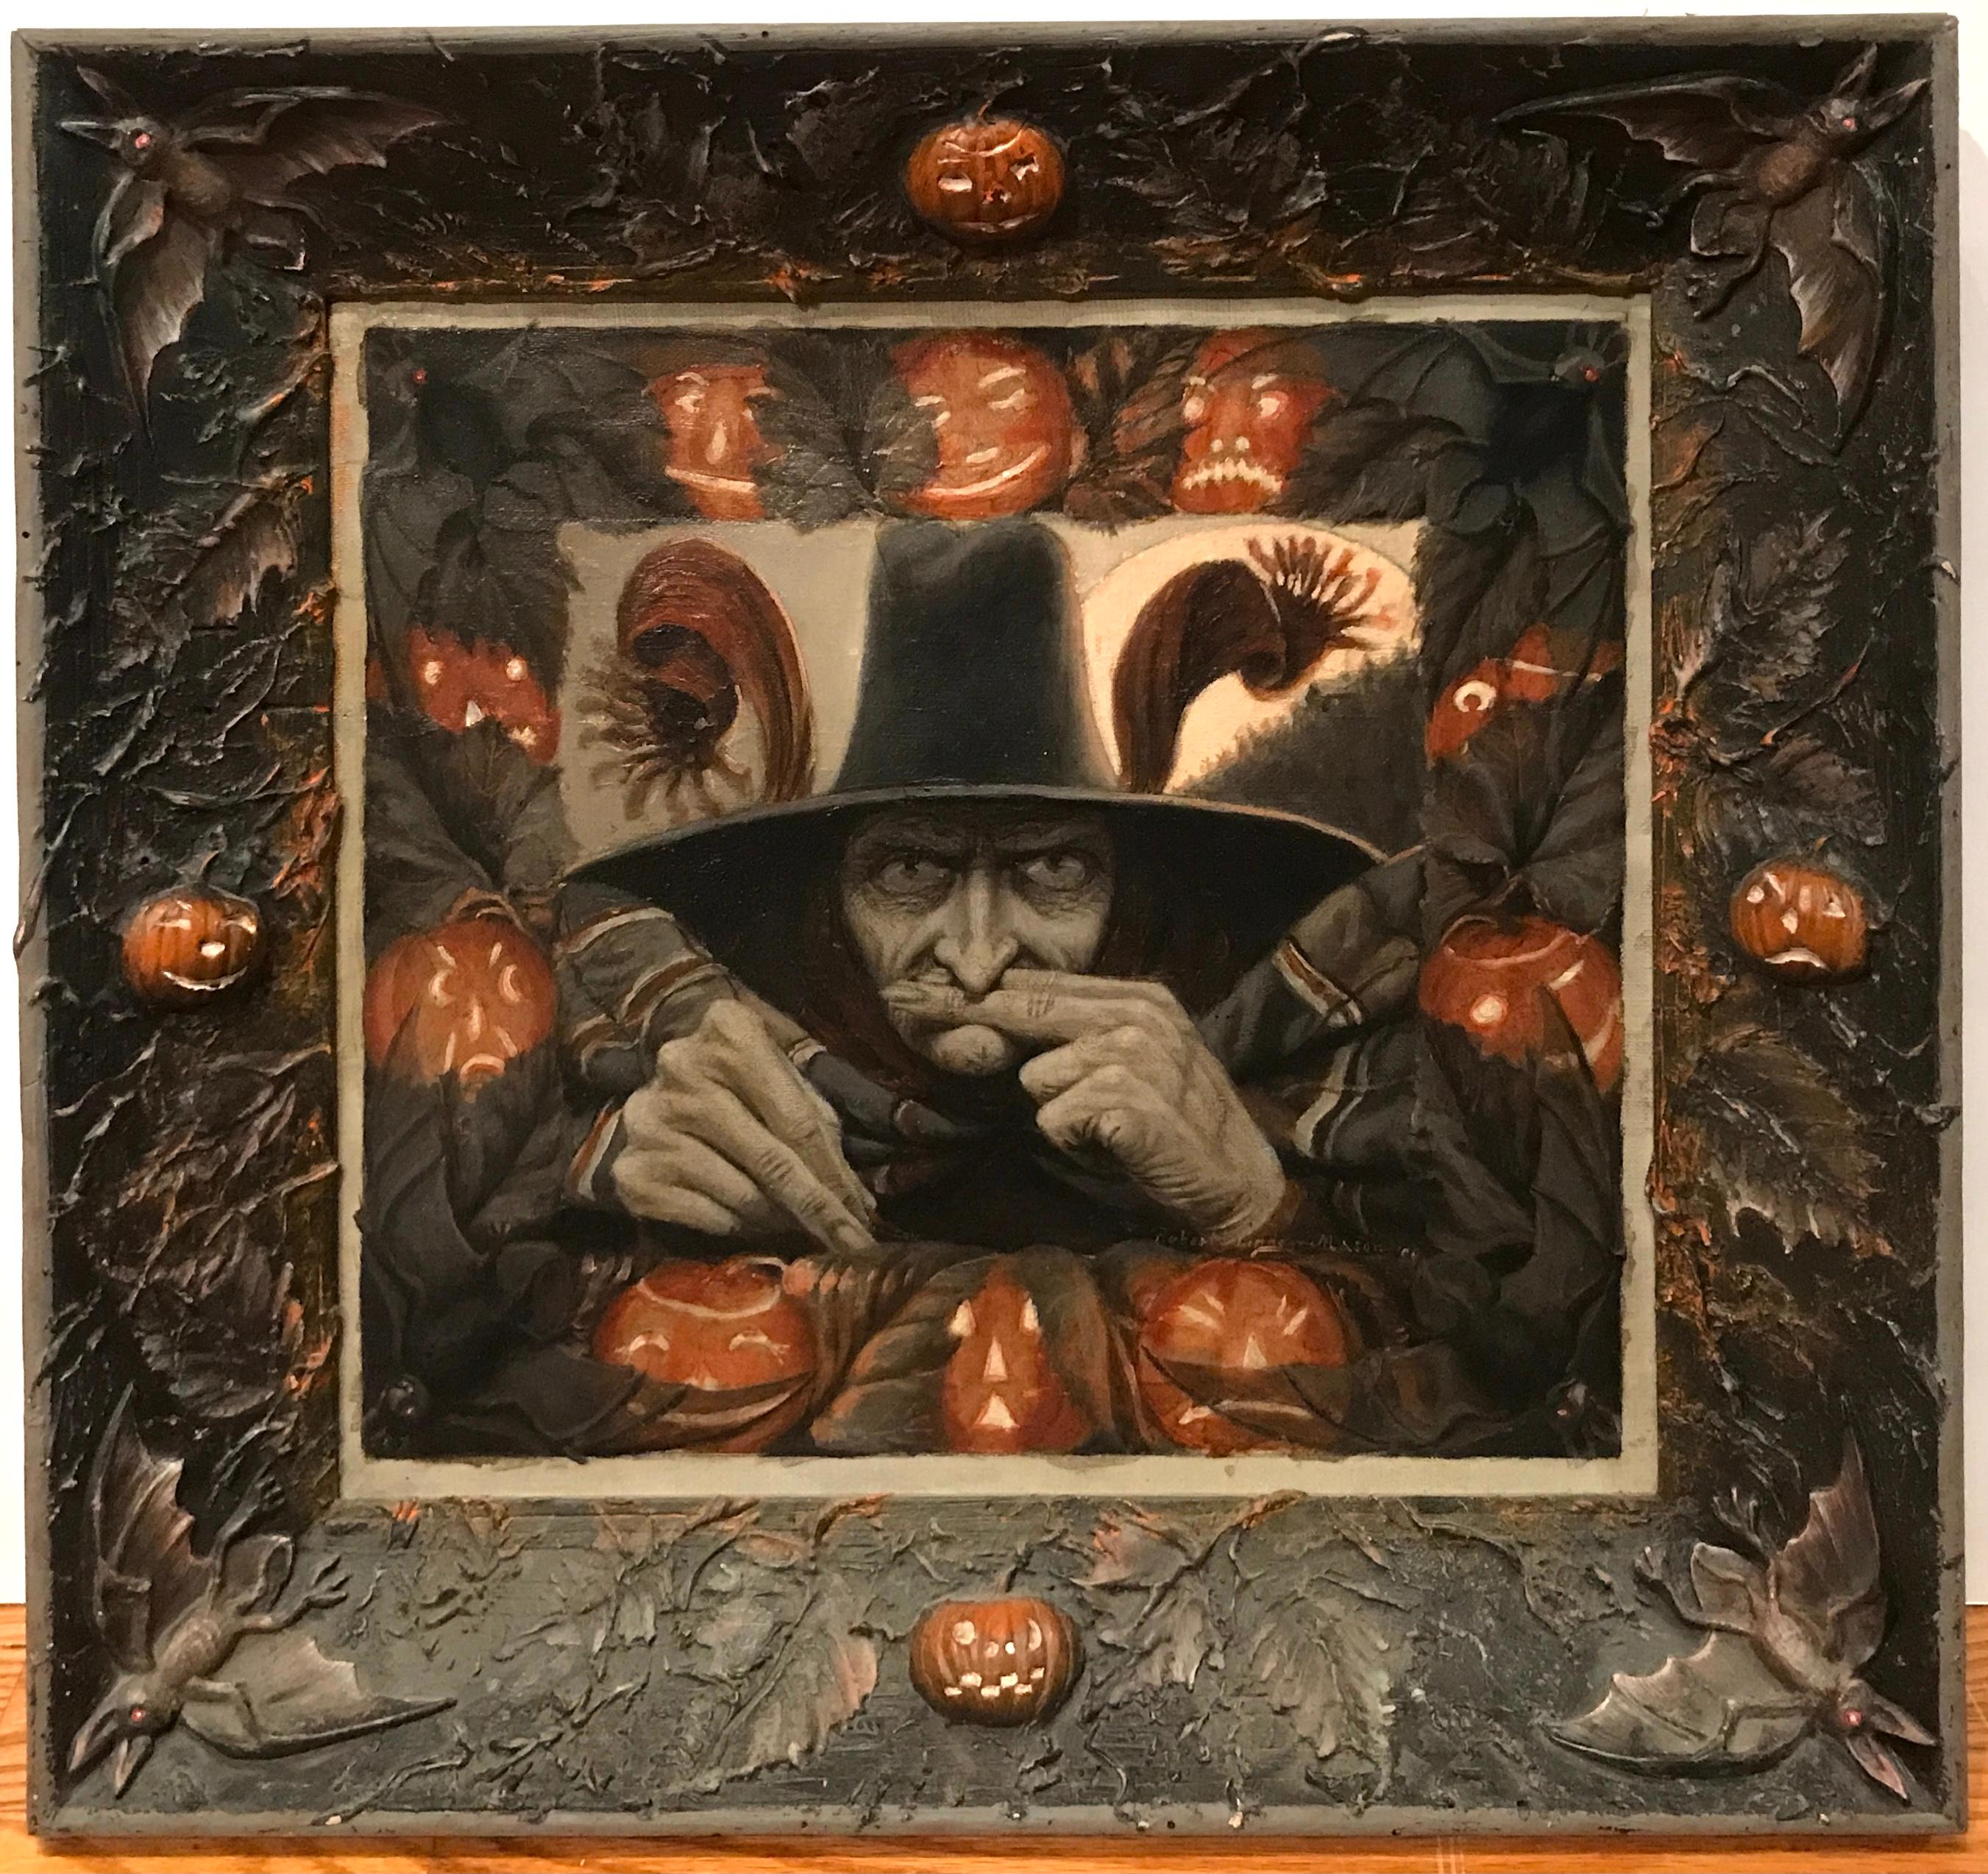 Halloween Witch with Pumpkins - Painting by Robert Lindsay Mason